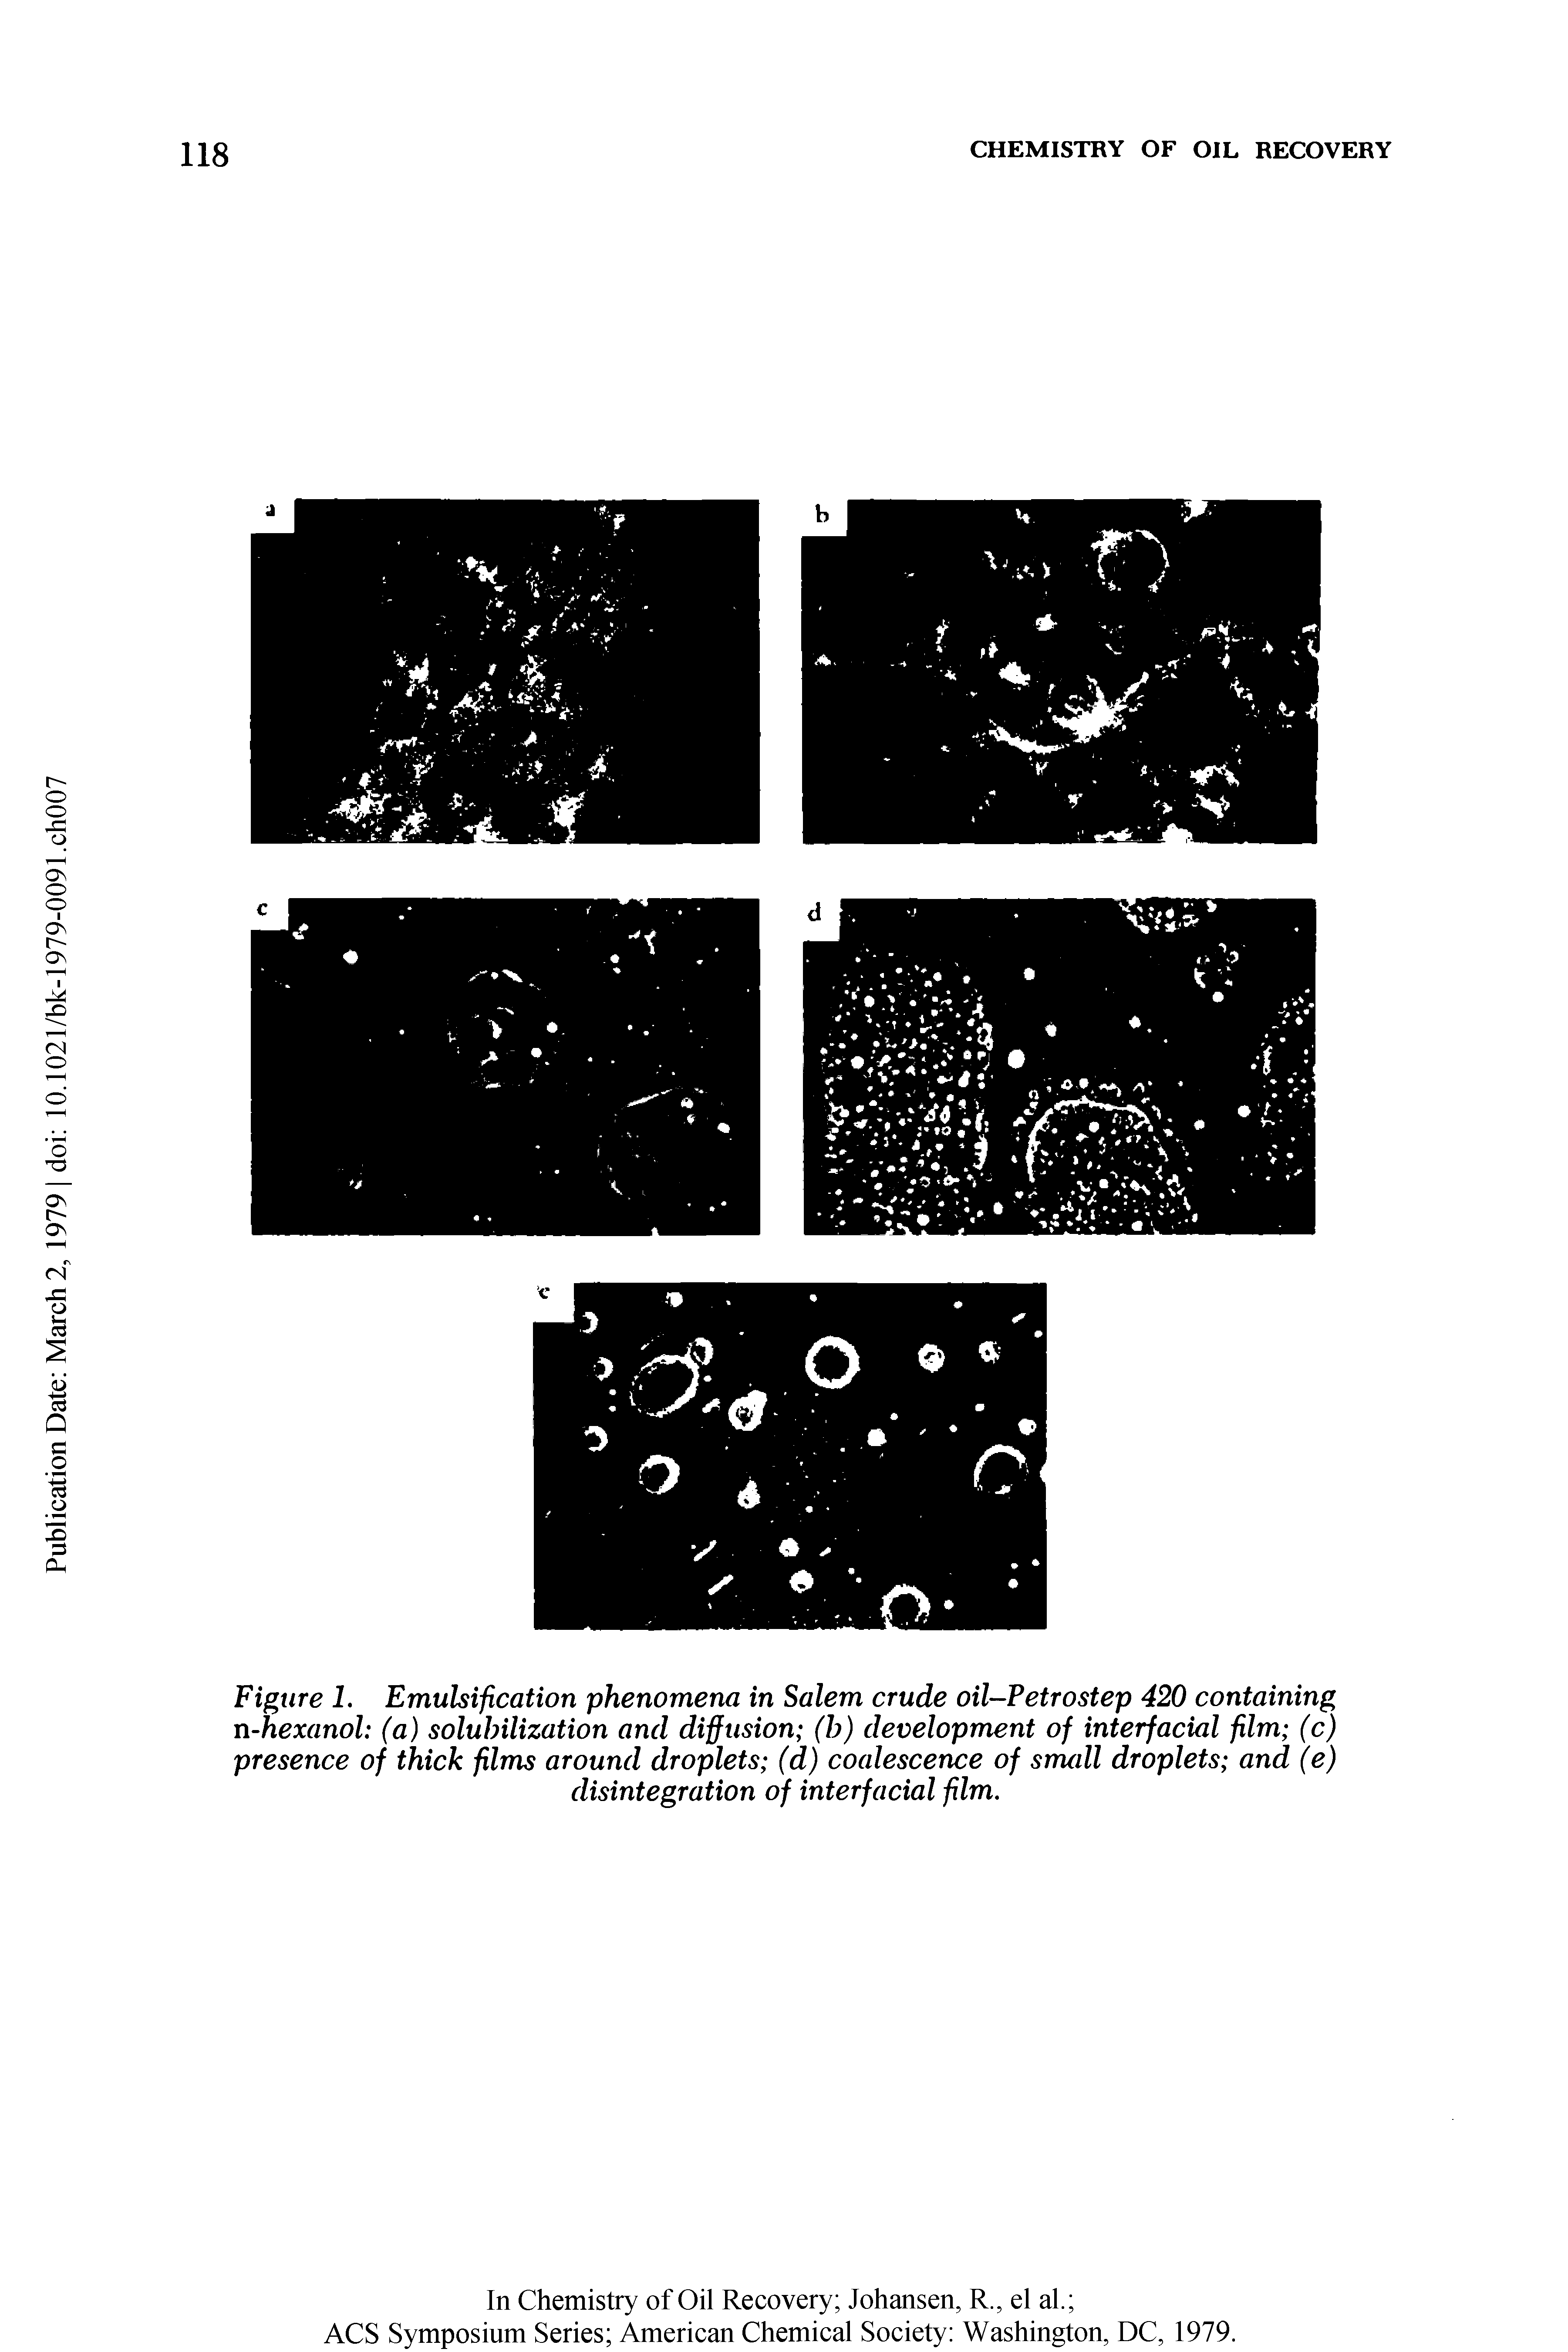 Figure 1. Emulsification phenomena in Salem crude oil-Petrostep 420 containing n-hexanol (a) solubilization and diffusion (b) development of interfacial film (c) presence of thick films around droplets (d) coalescence of srrudl droplets and (e) disintegration of interfacial film.